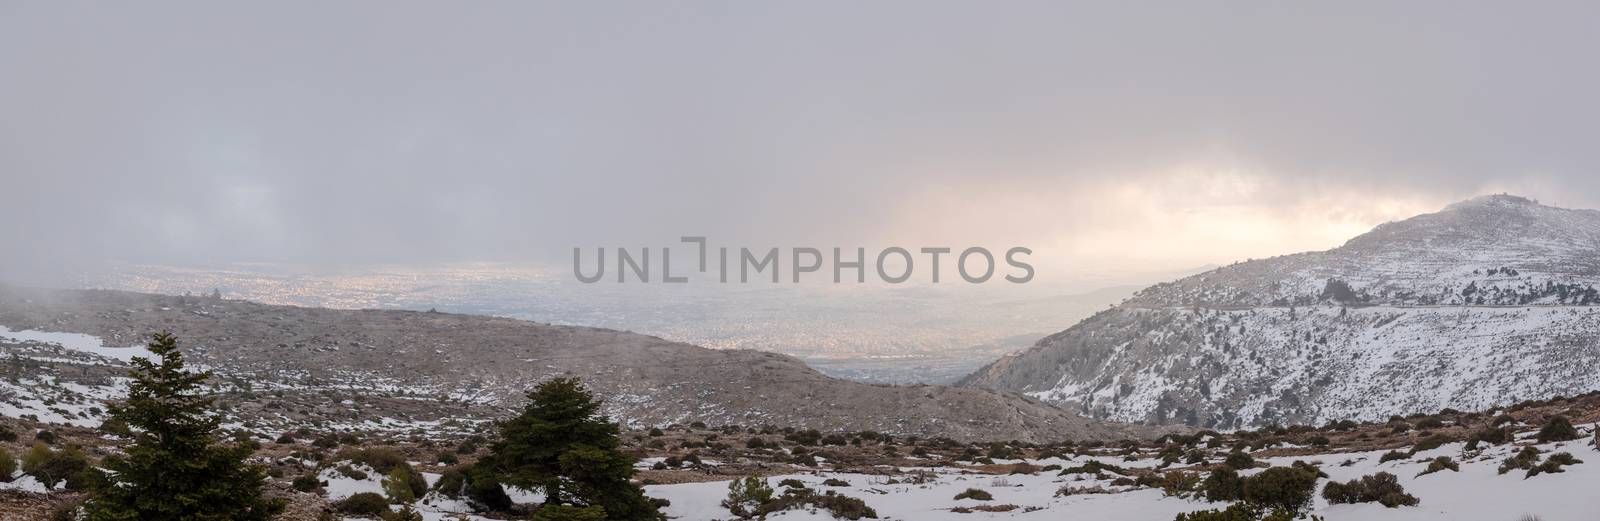 Panoramic view of Parnitha mountain landscape with snow and cloudy sky, Athens, Greece